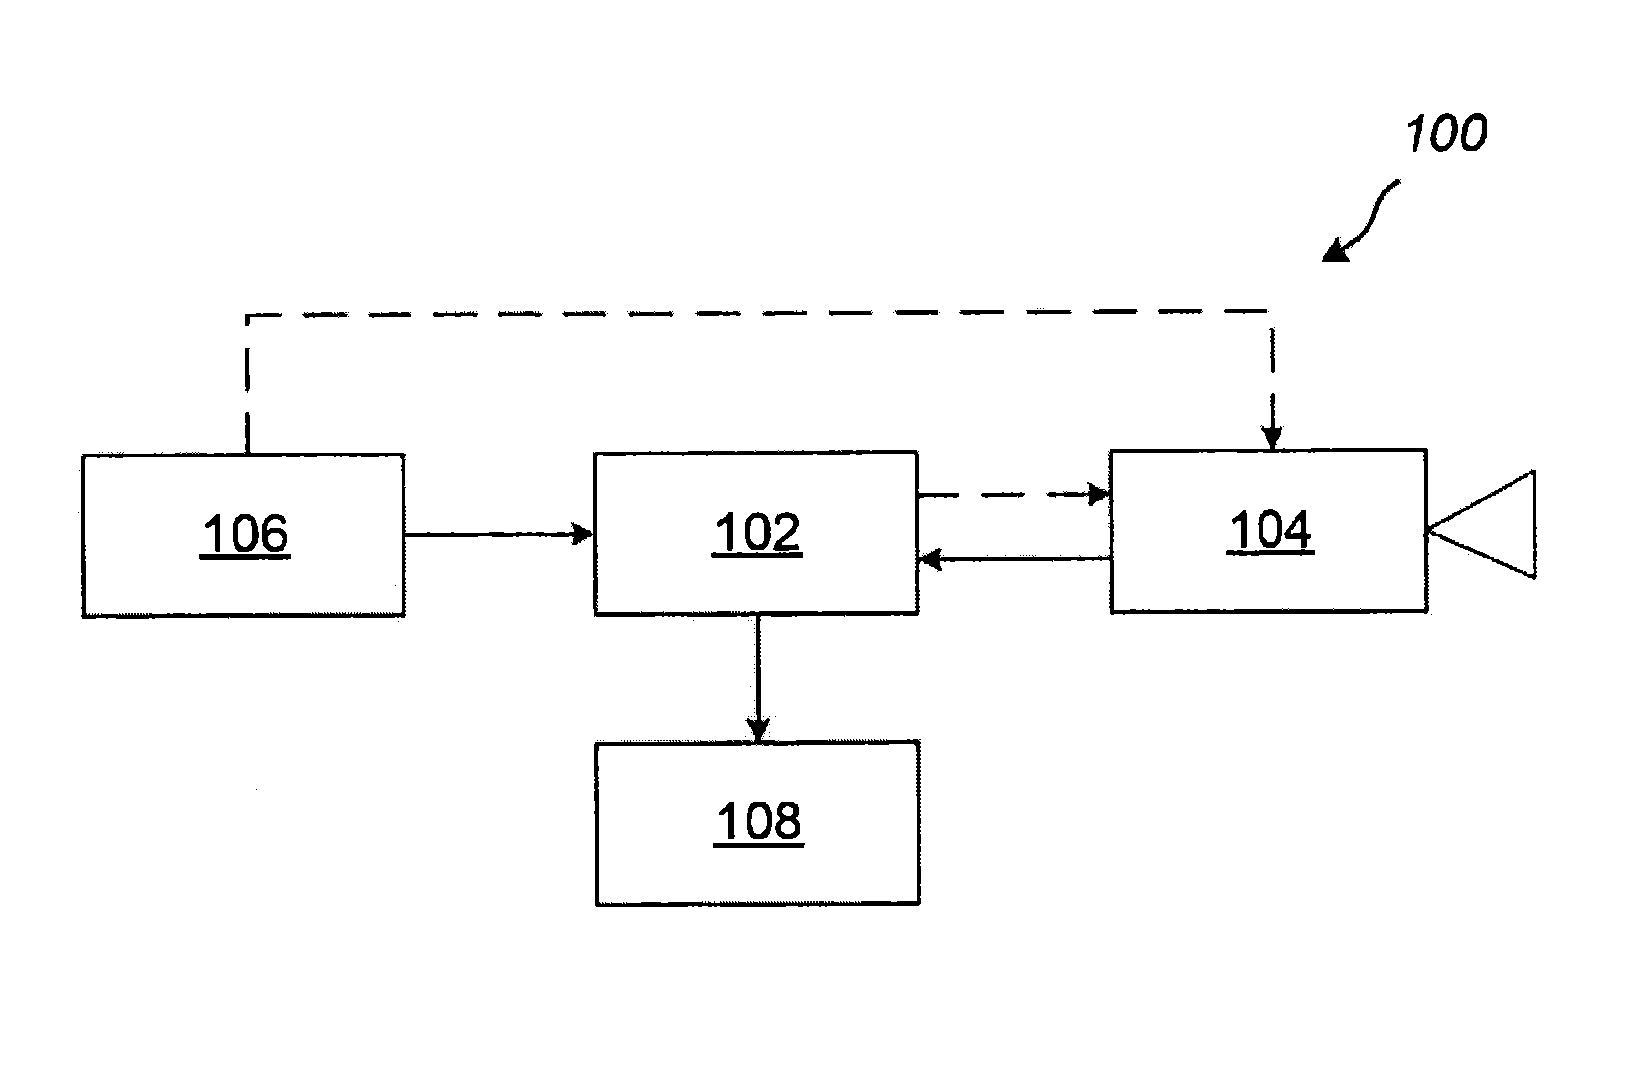 Control of an image capturing device